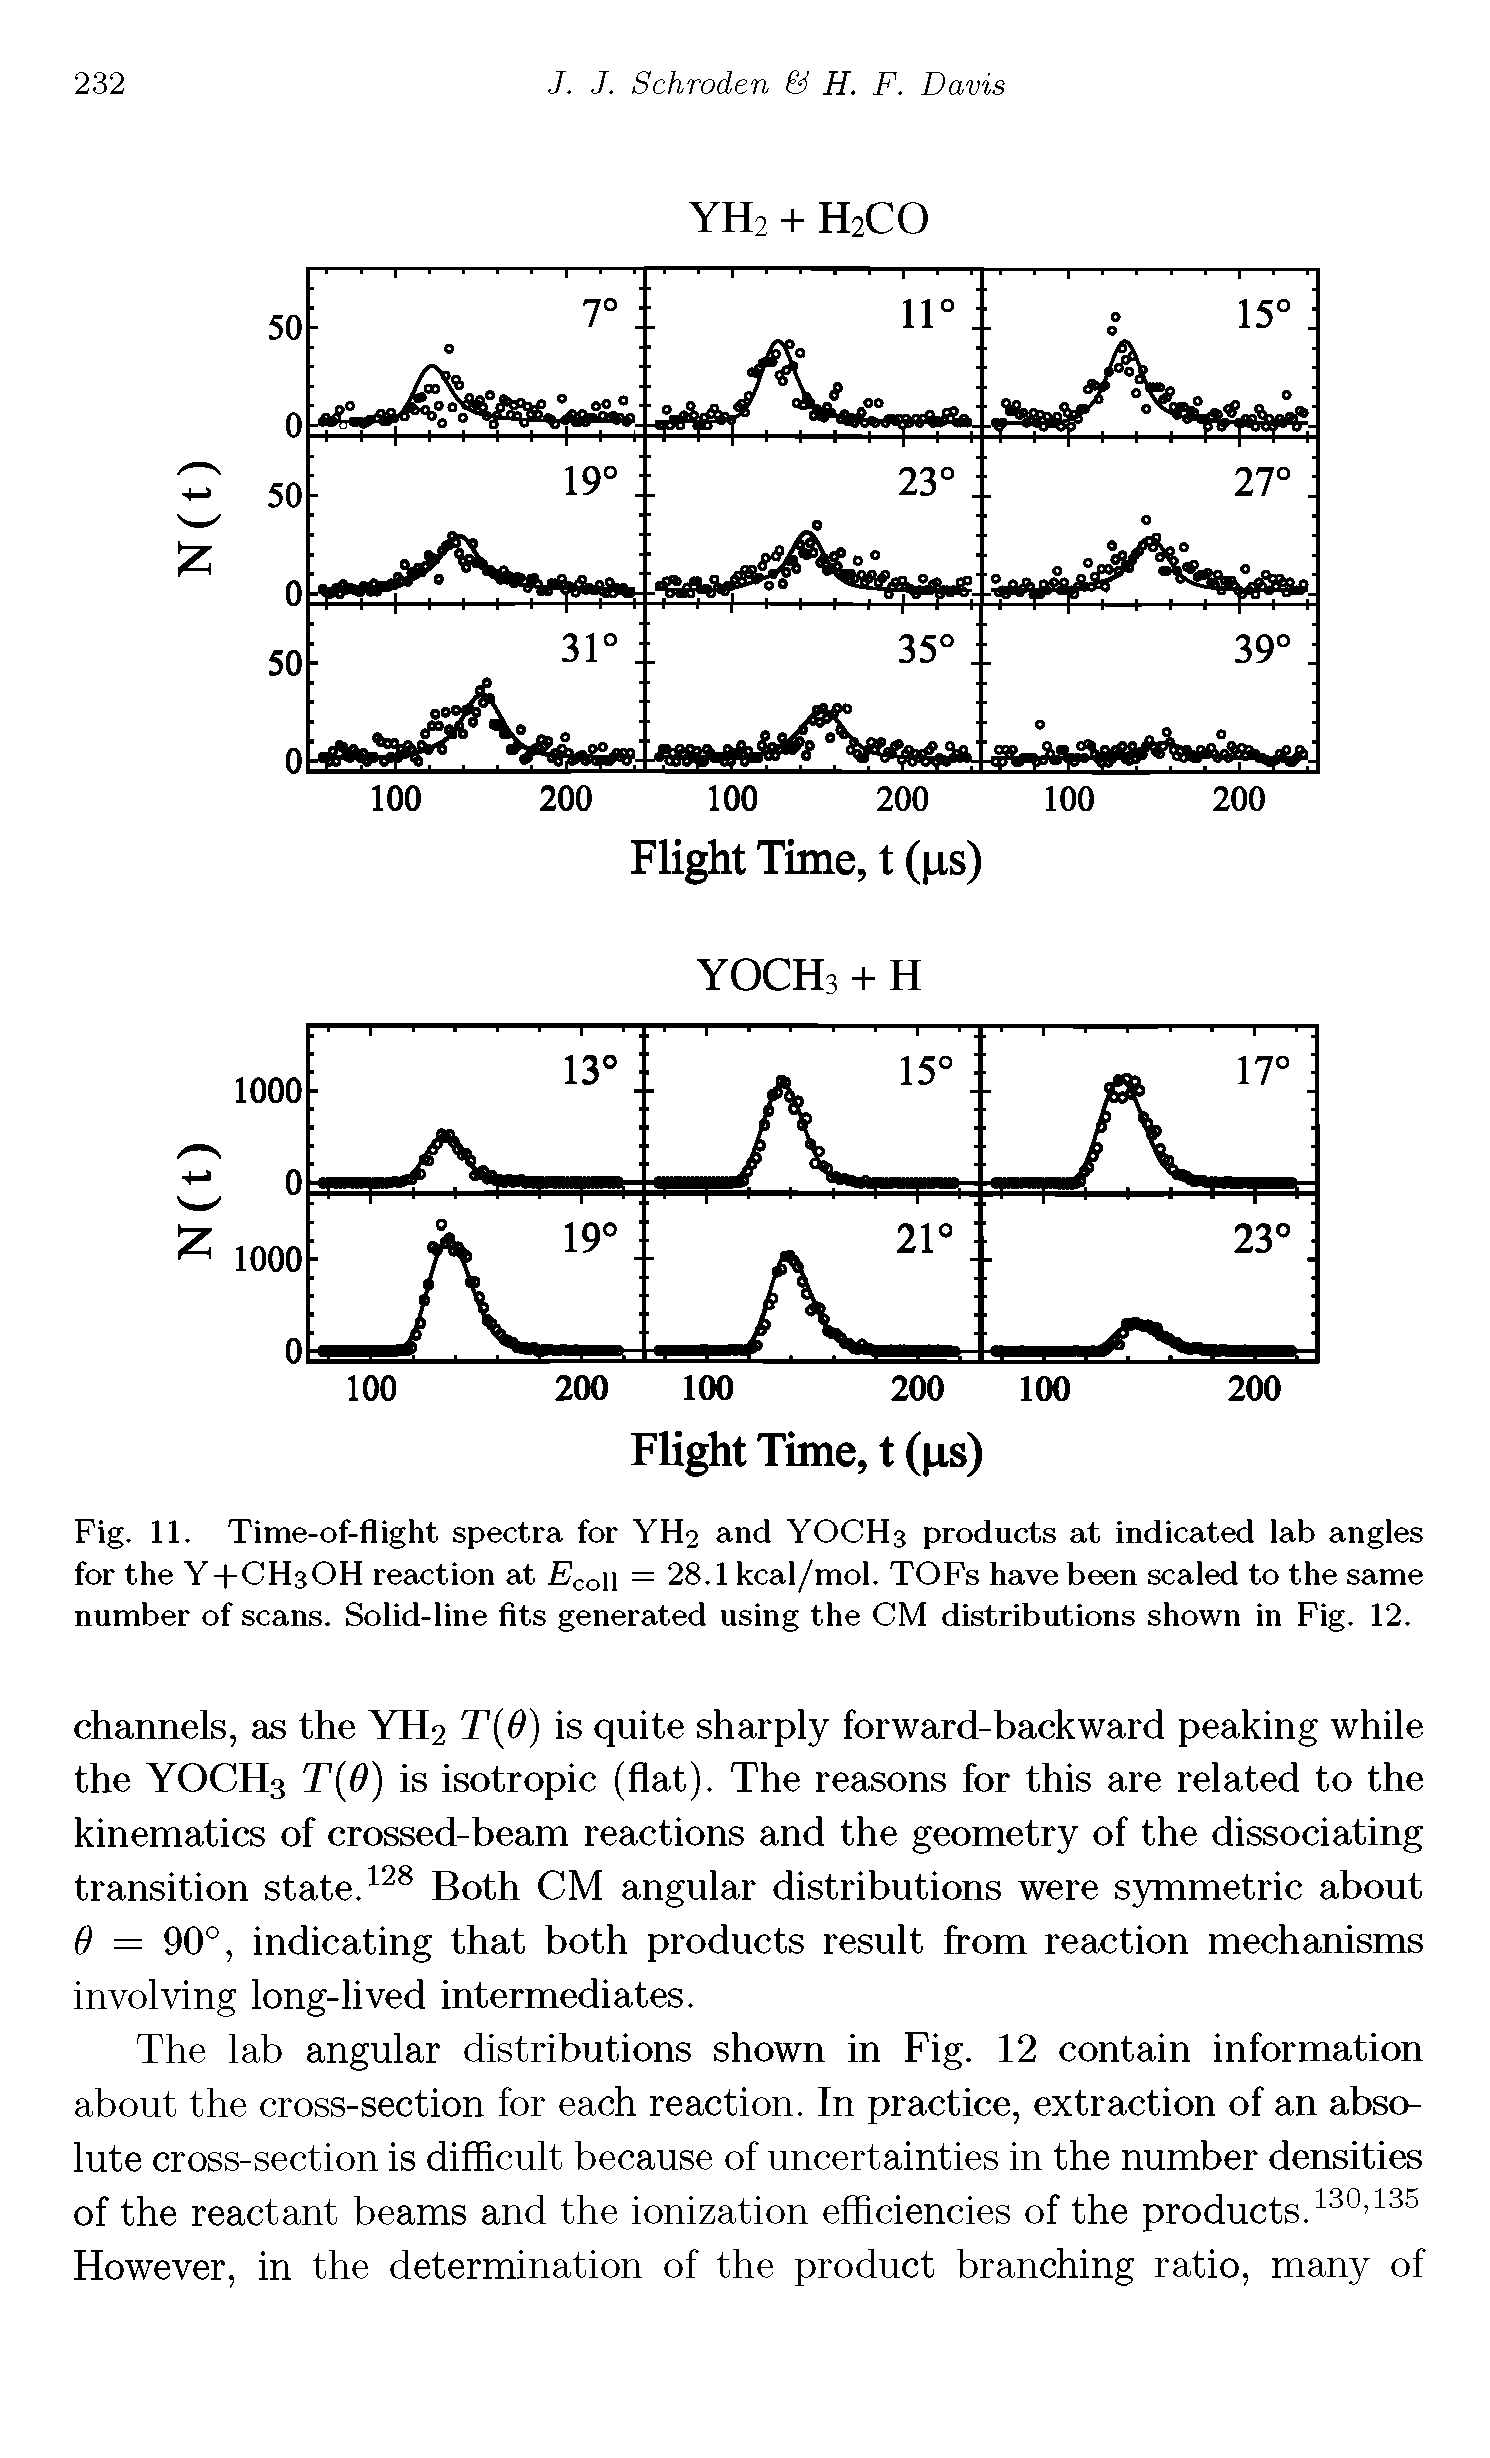 Fig. 11. Time-of-flight spectra for YH2 and YOCH3 products at indicated lab angles for the Y+CH3OH reaction at con = 28.1 kcal/mol. TOFs have been scaled to the same number of scans. Solid-line fits generated using the CM distributions shown in Fig. 12.